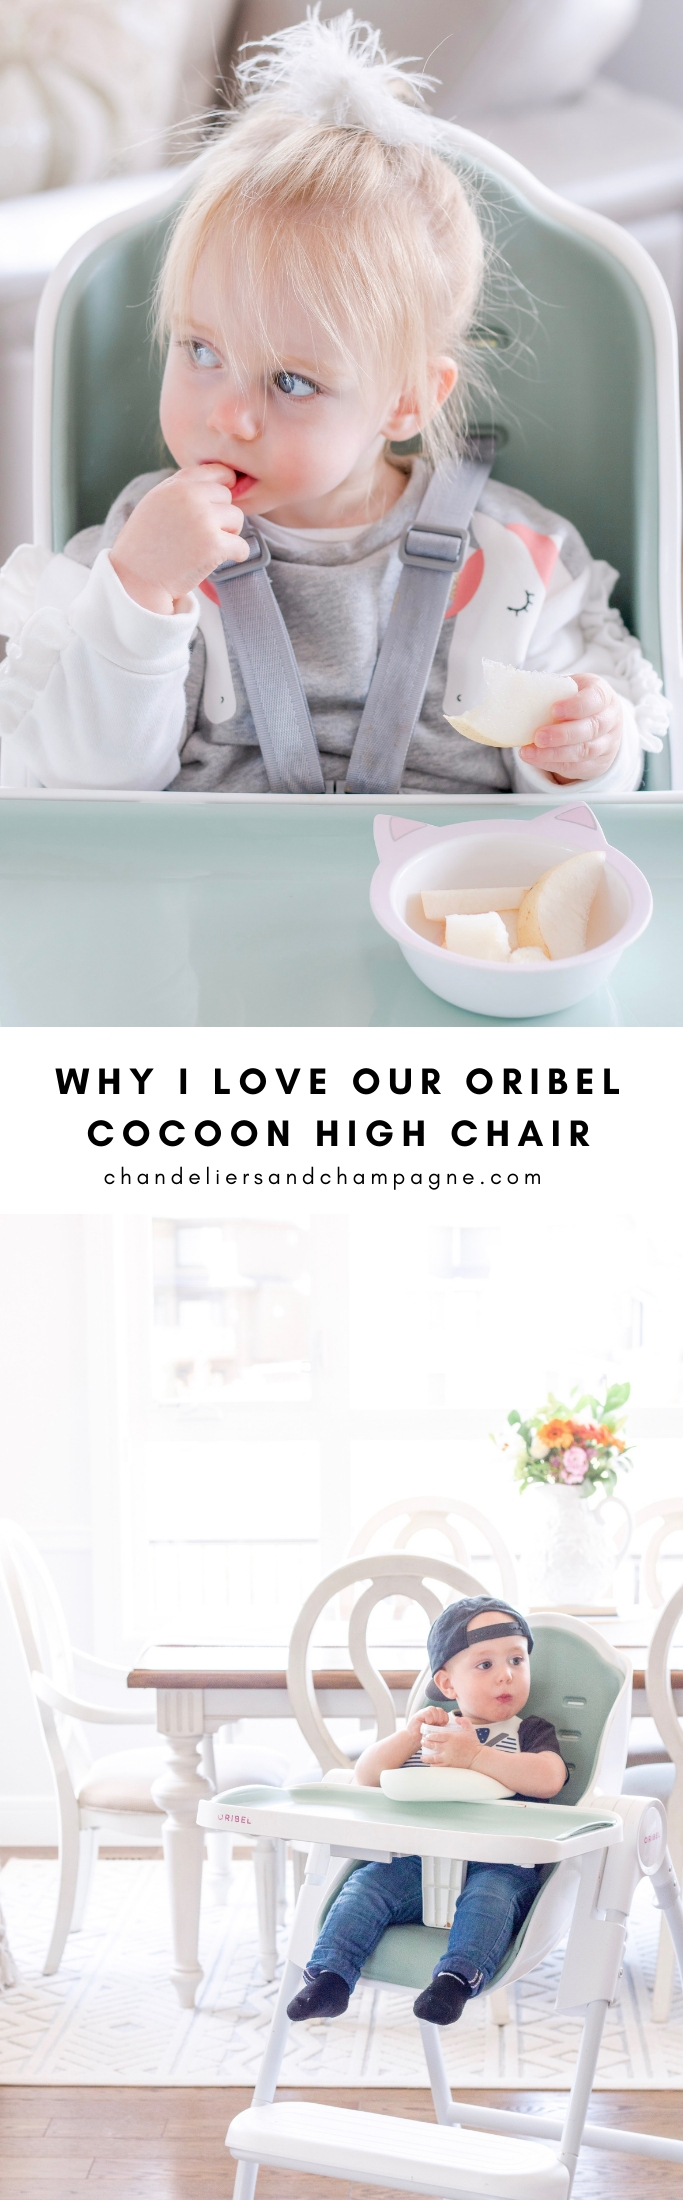 Why I love our oribel cocoon high chai